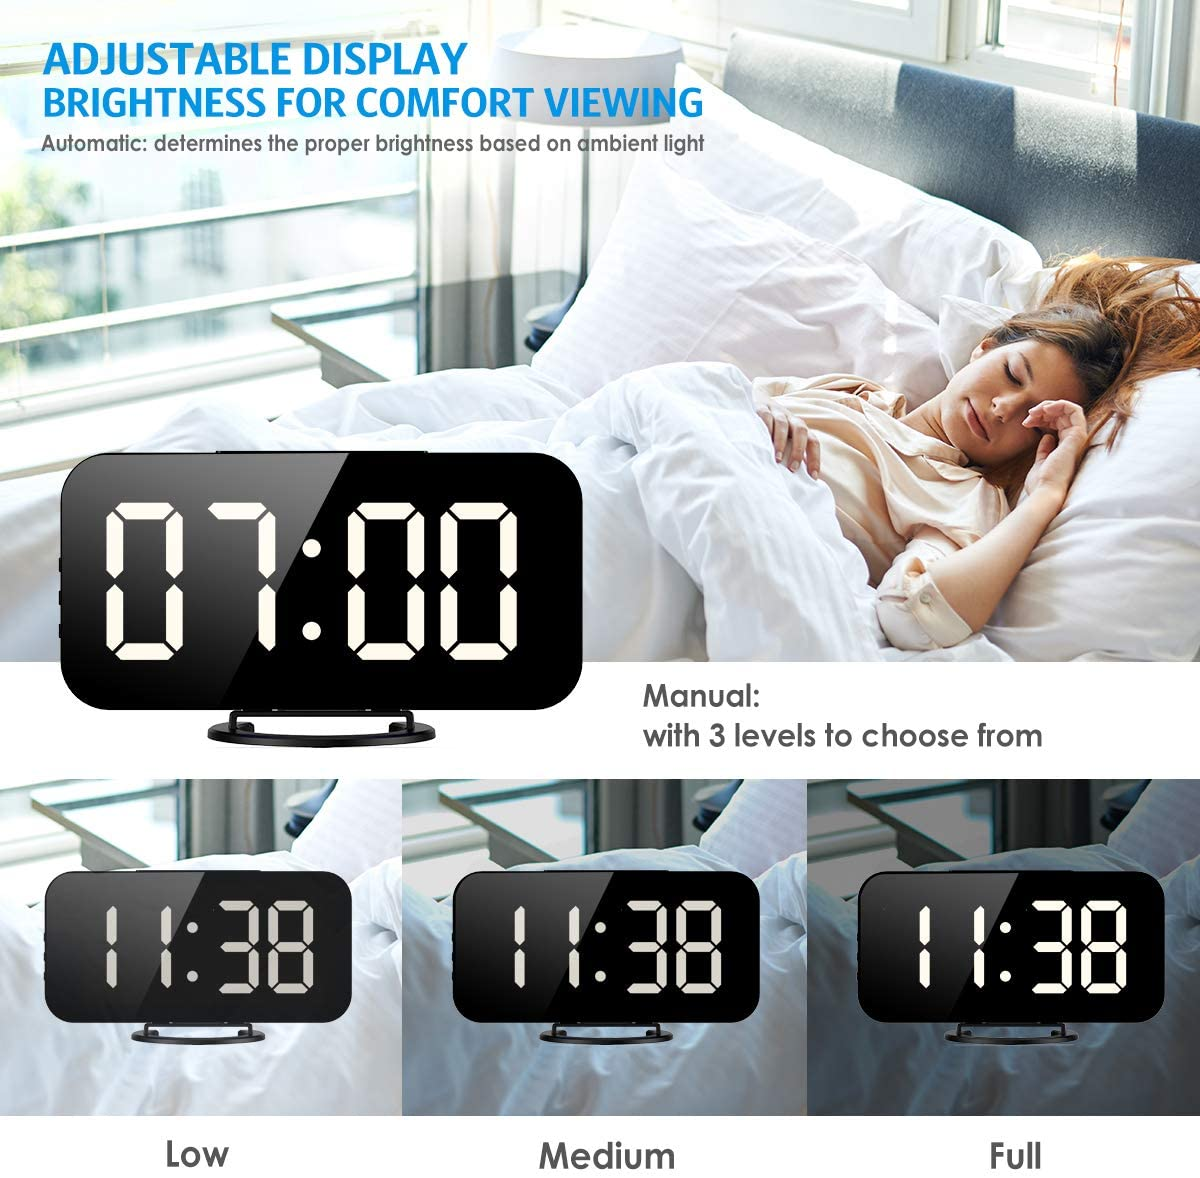 Digital Alarm Clock, Newest Version 6.5" Large Mirror Surface LED Clocks with Dual USB Charger Ports, Auto/Custom Brightness, 12/24H Display with Snooze Function for Bedroom Home Office (Black-White)